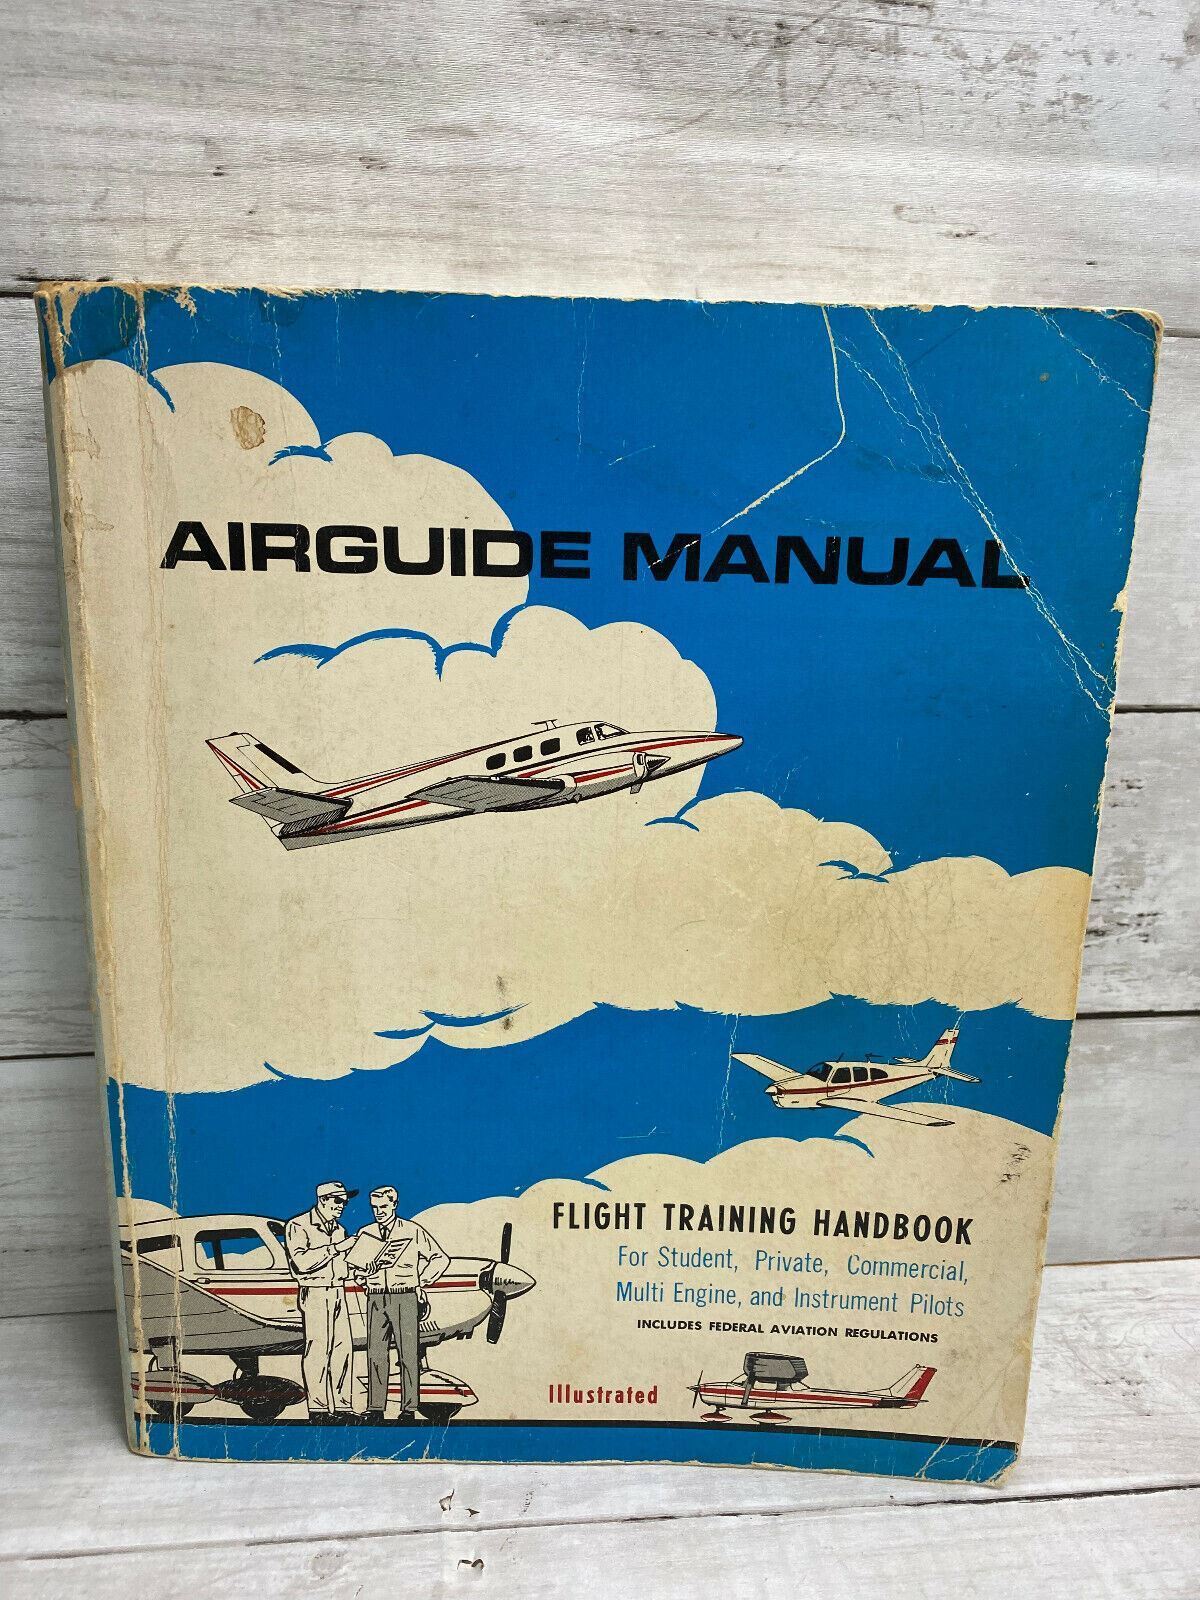 Vintage 1967 Airguide Manual How To Fly Book Flight Training Handbook Collectibl